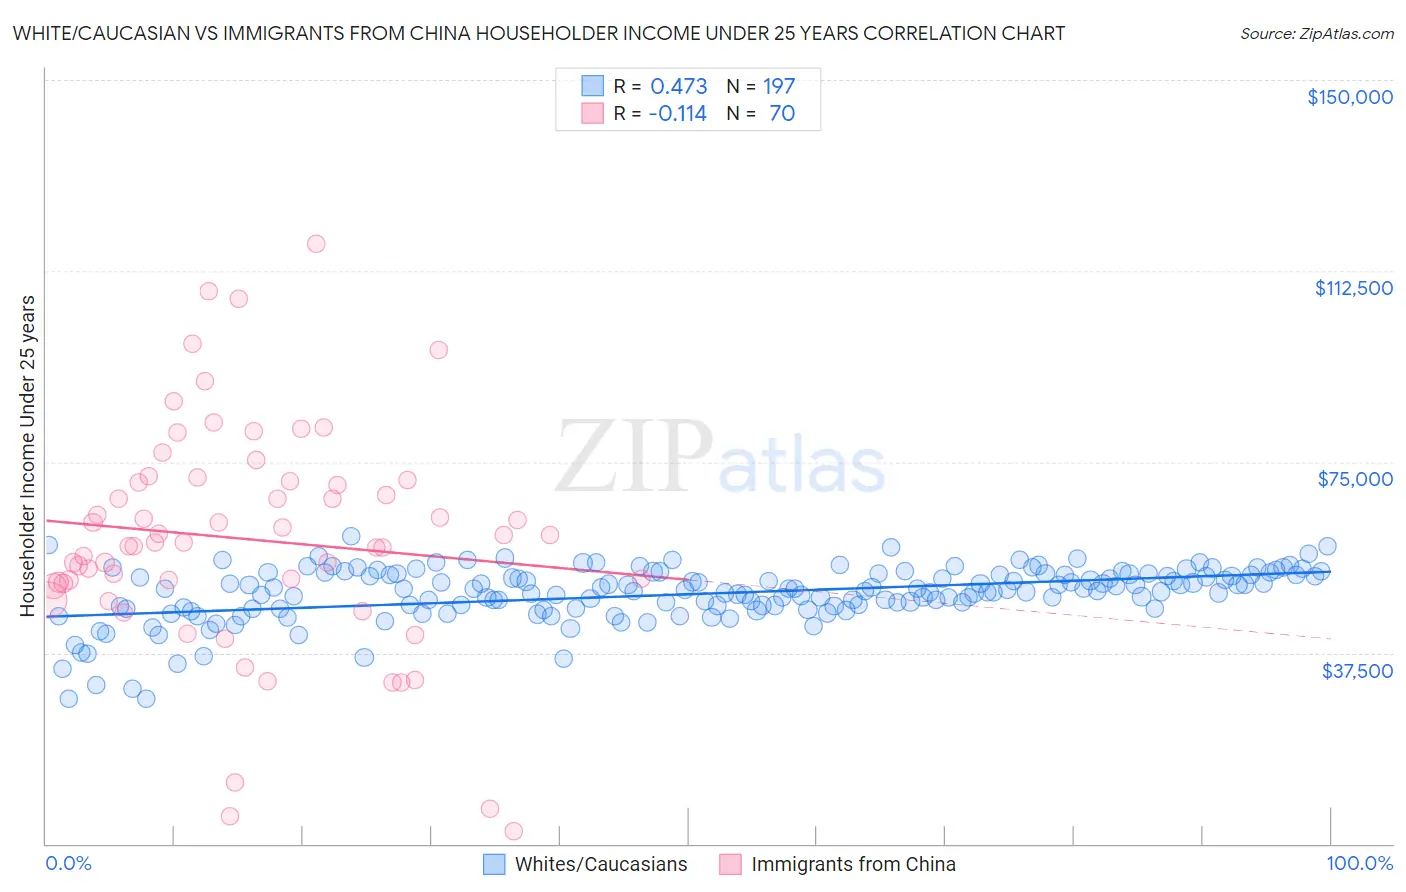 White/Caucasian vs Immigrants from China Householder Income Under 25 years